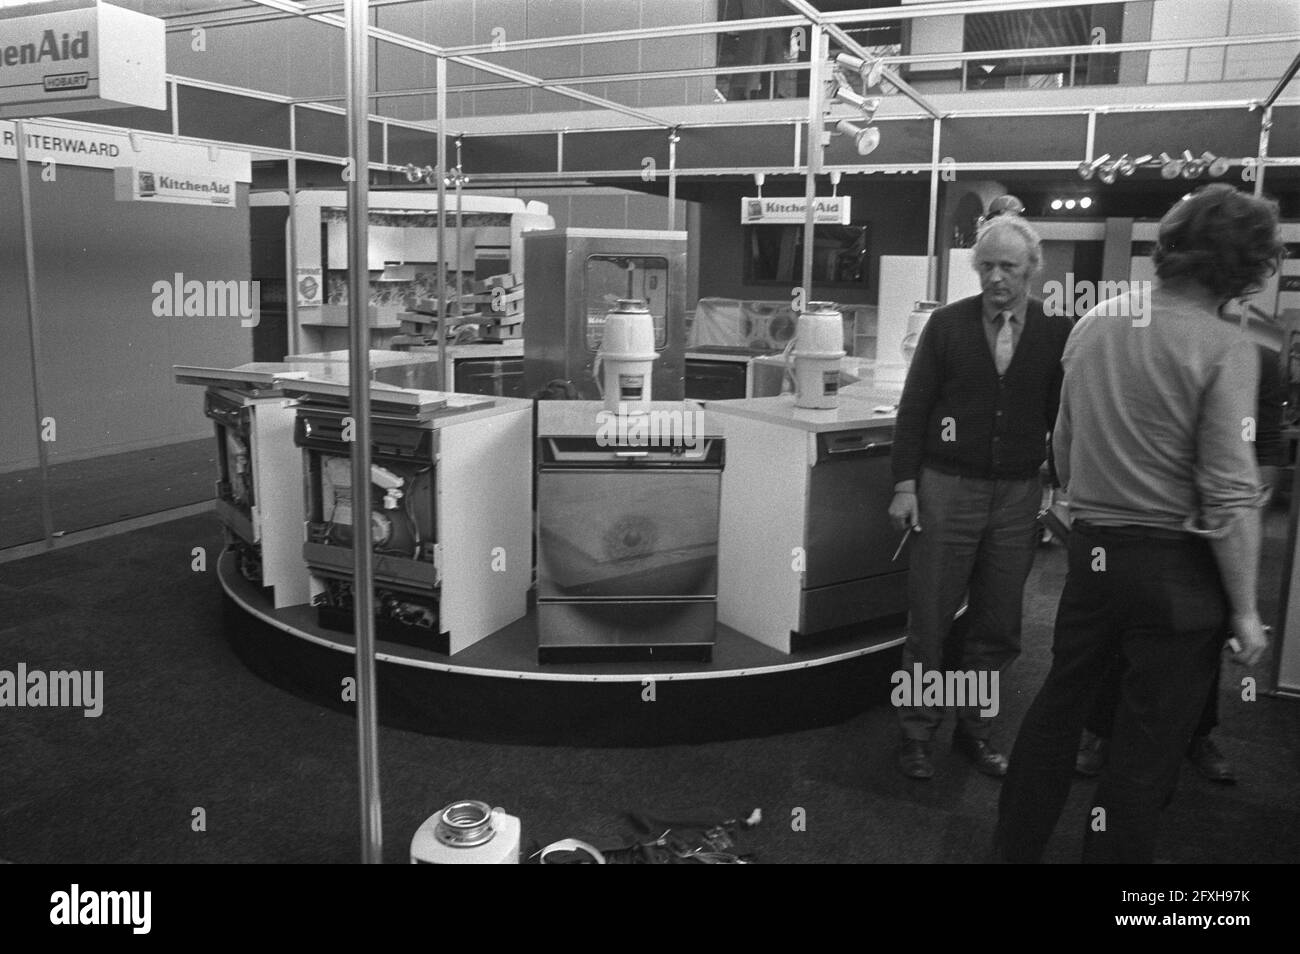 https://c8.alamy.com/comp/2FXH97K/preparation-for-29th-household-fair-in-rai-some-household-gadgets-april-18-1974-household-fairs-the-netherlands-20th-century-press-agency-photo-news-to-remember-documentary-historic-photography-1945-1990-visual-stories-human-history-of-the-twentieth-century-capturing-moments-in-time-2FXH97K.jpg